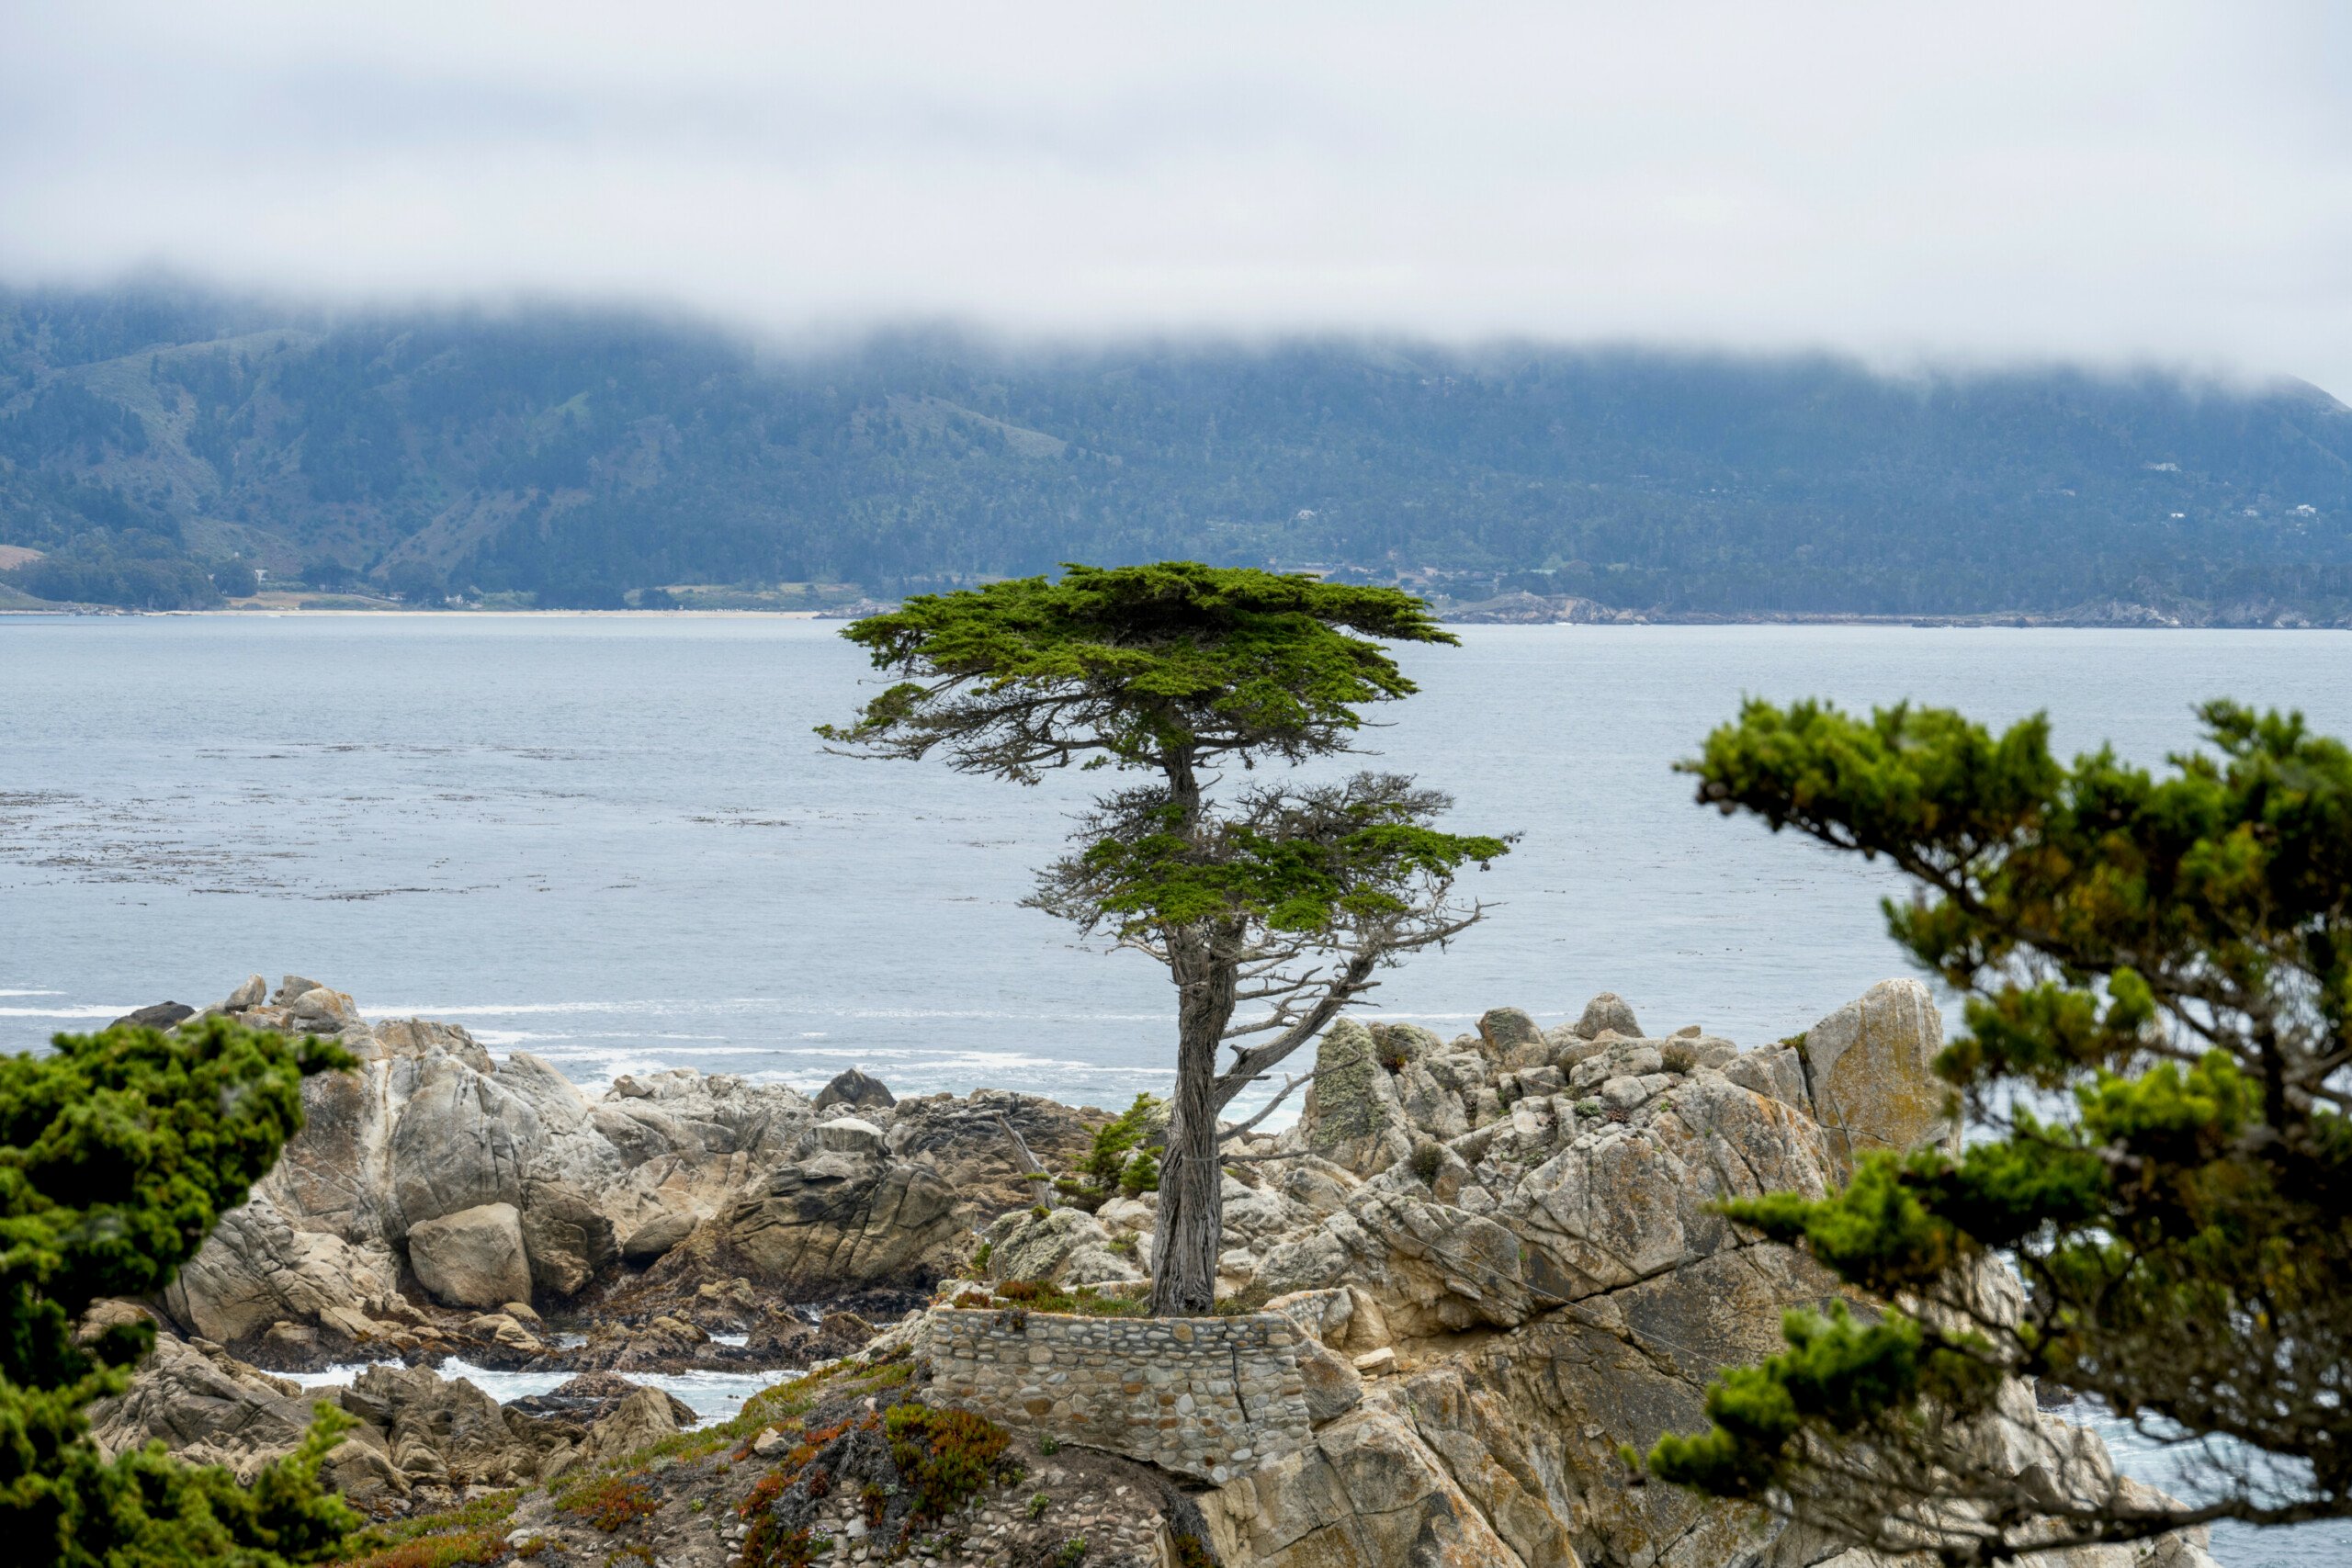 Lone Cypress tree standing on a rocky outcrop overlooking the Pacific Ocean along the 17 Mile Drive at Pebble Beach.